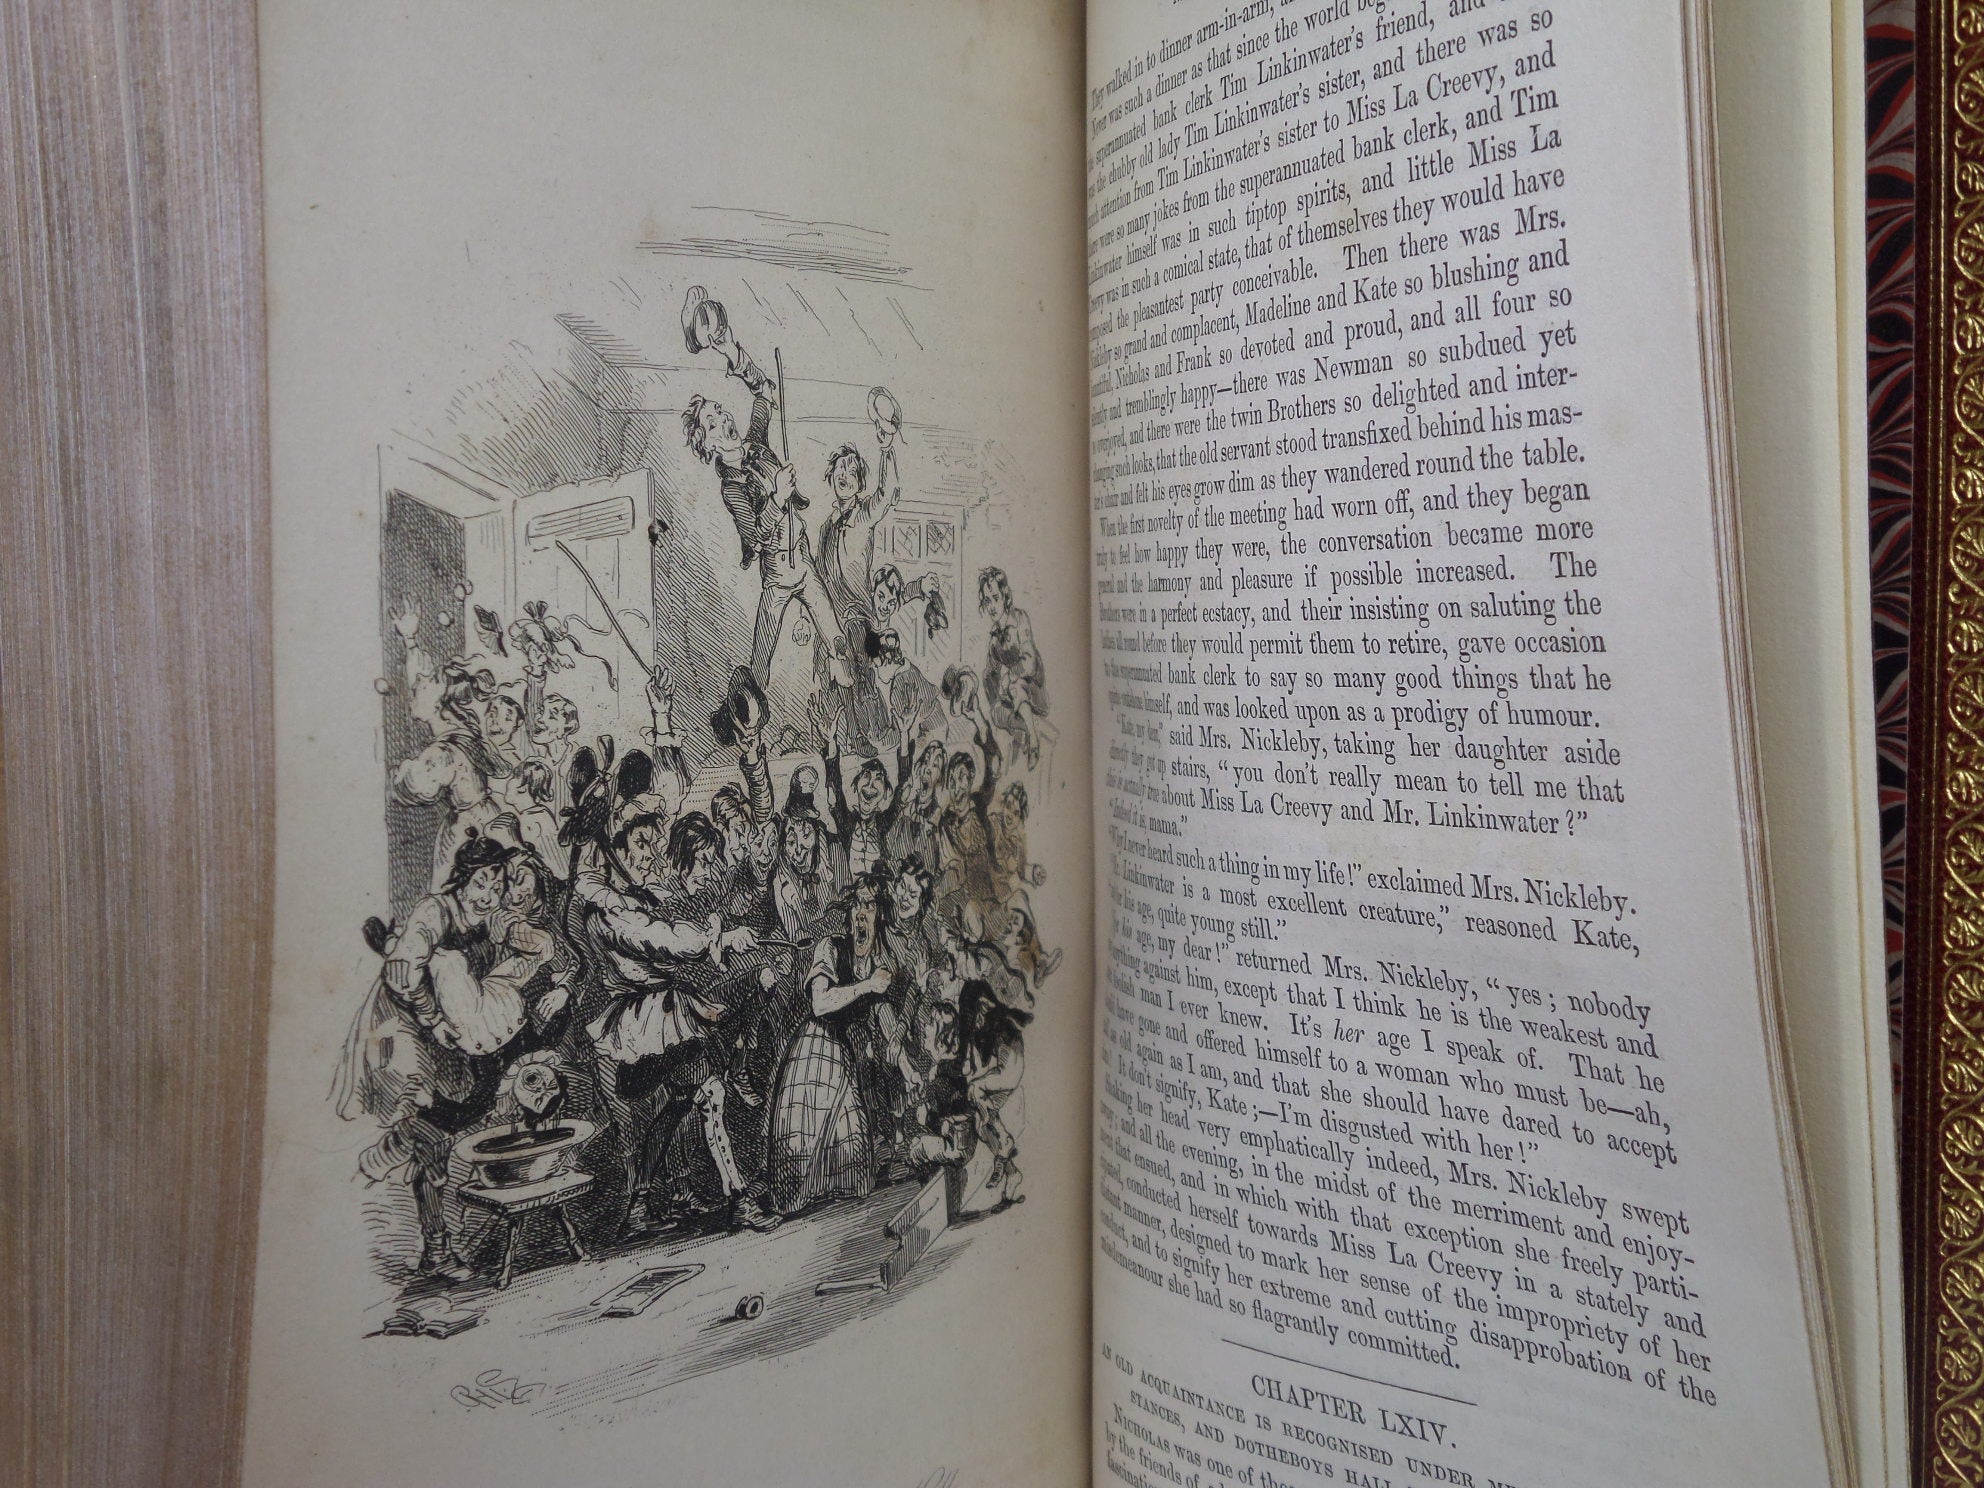 THE LIFE AND ADVENTURES OF NICHOLAS NICKLEBY BY CHARLES DICKENS 1839 FIRST EDITION, FINE BINDING BY BRIAN FROST & CO.